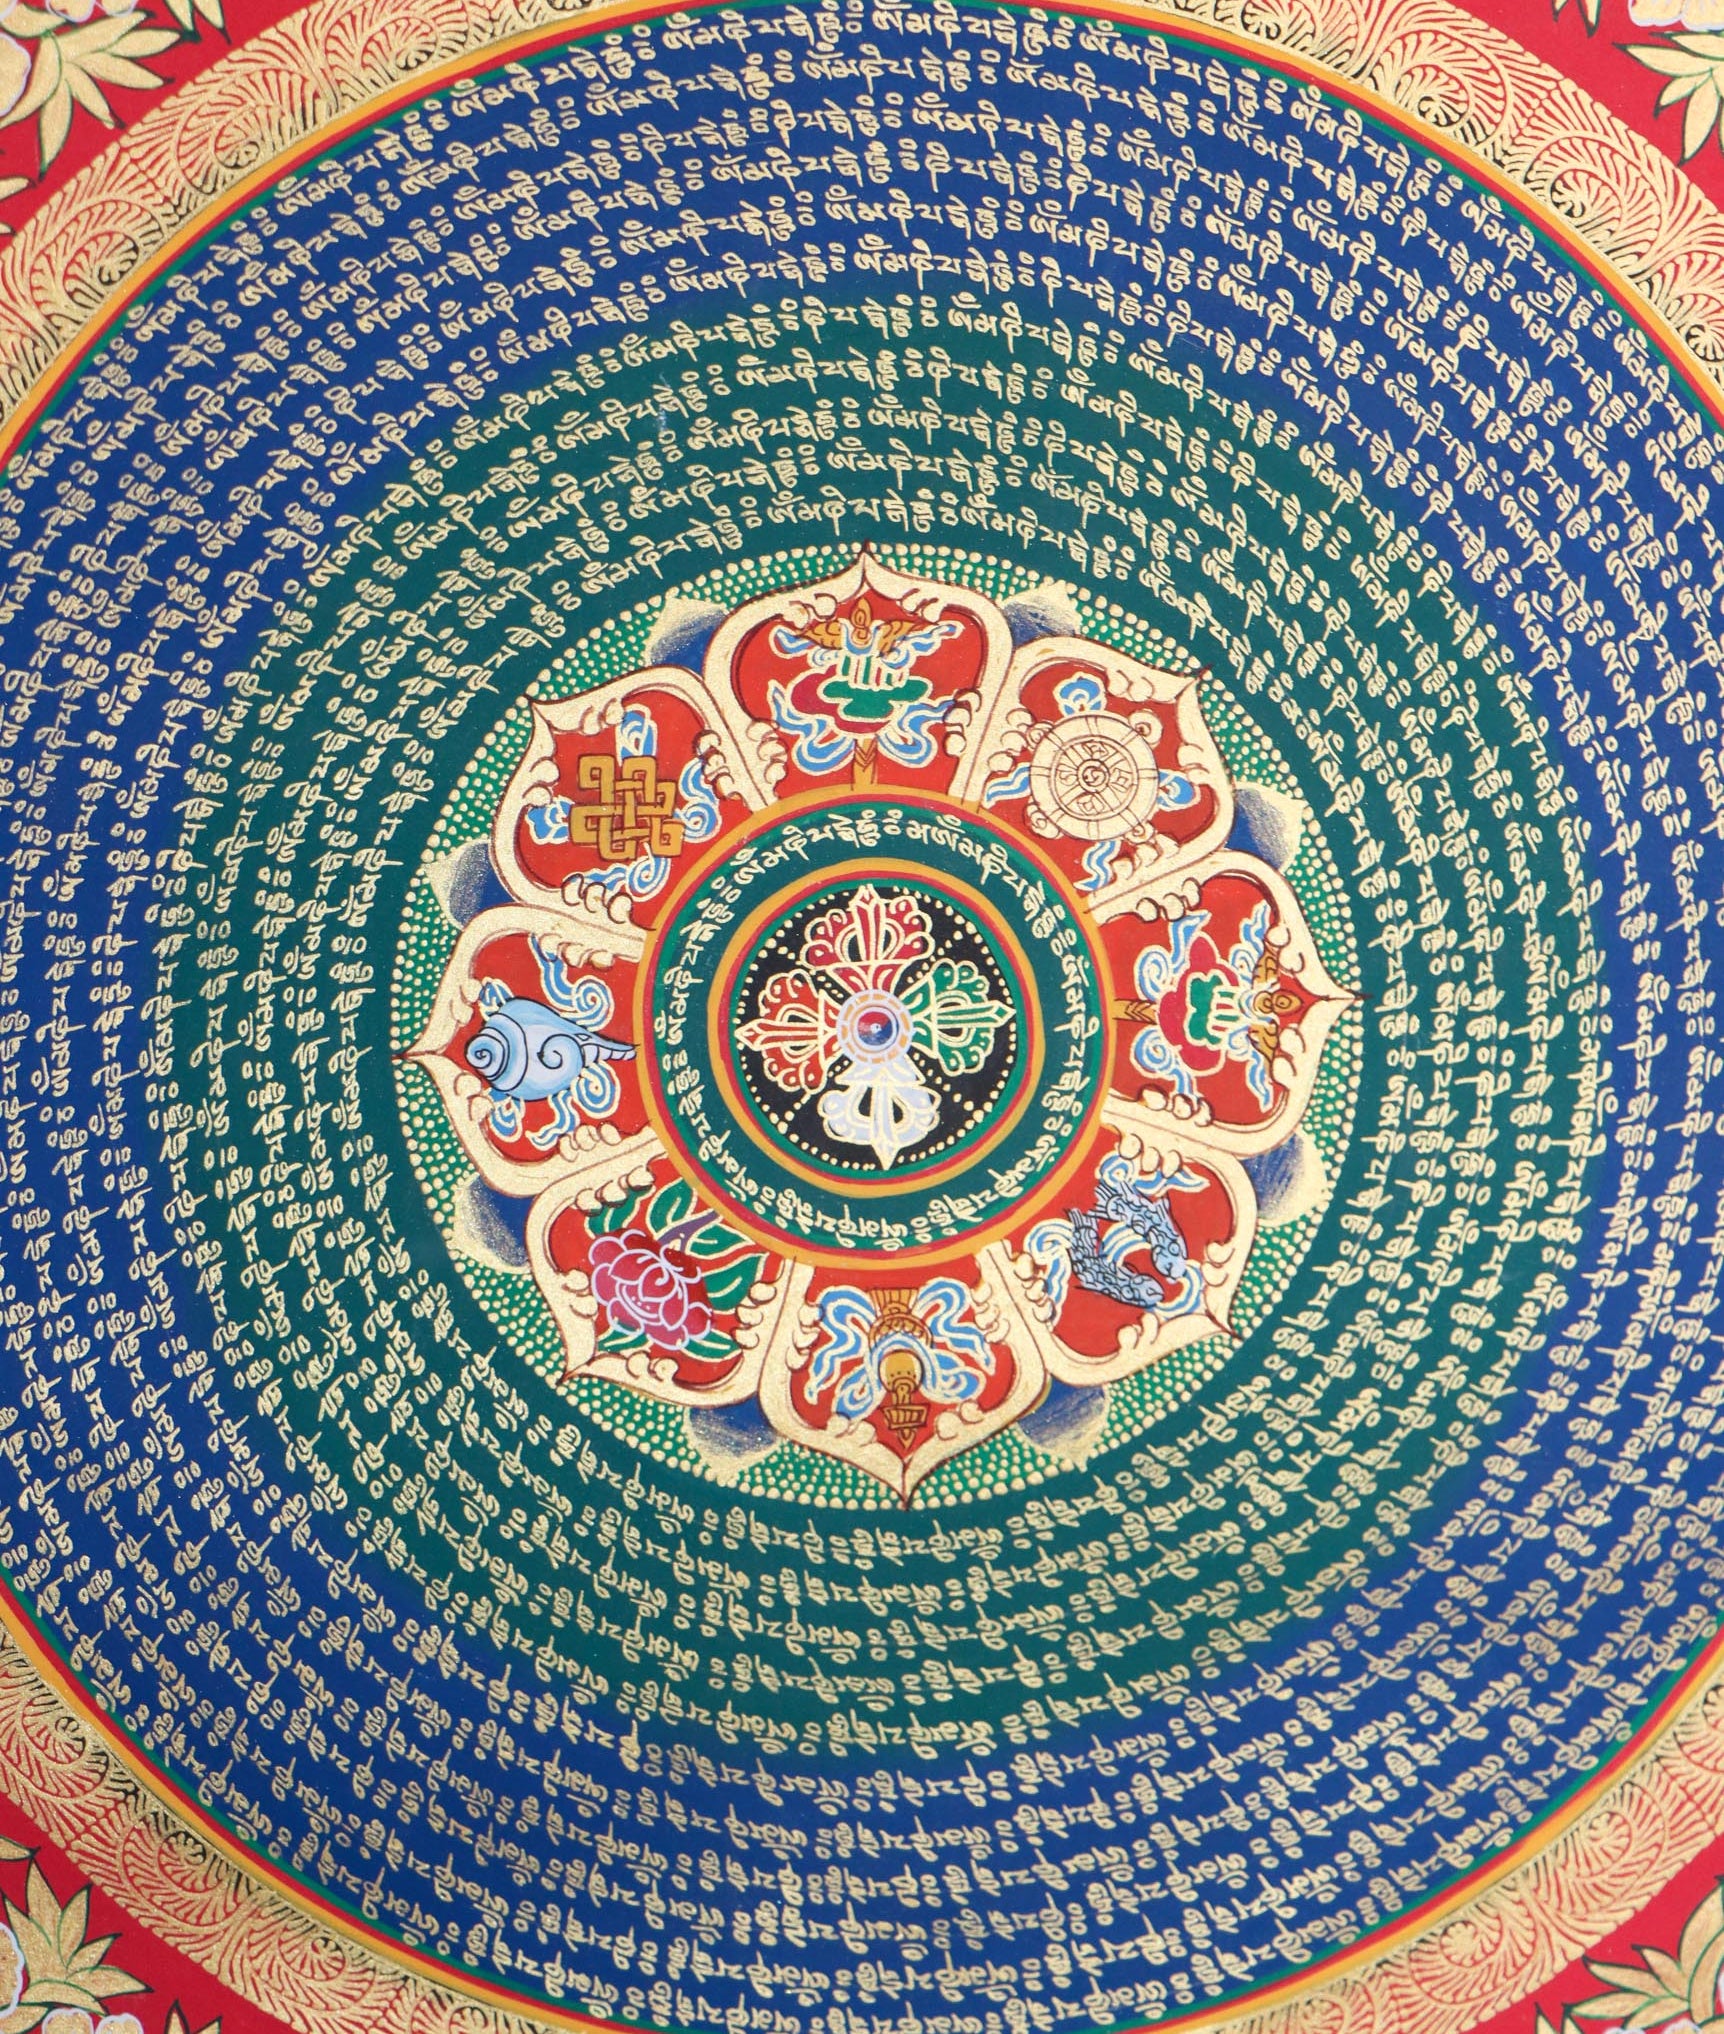 Mantra mandala including a double Dorje in the centre